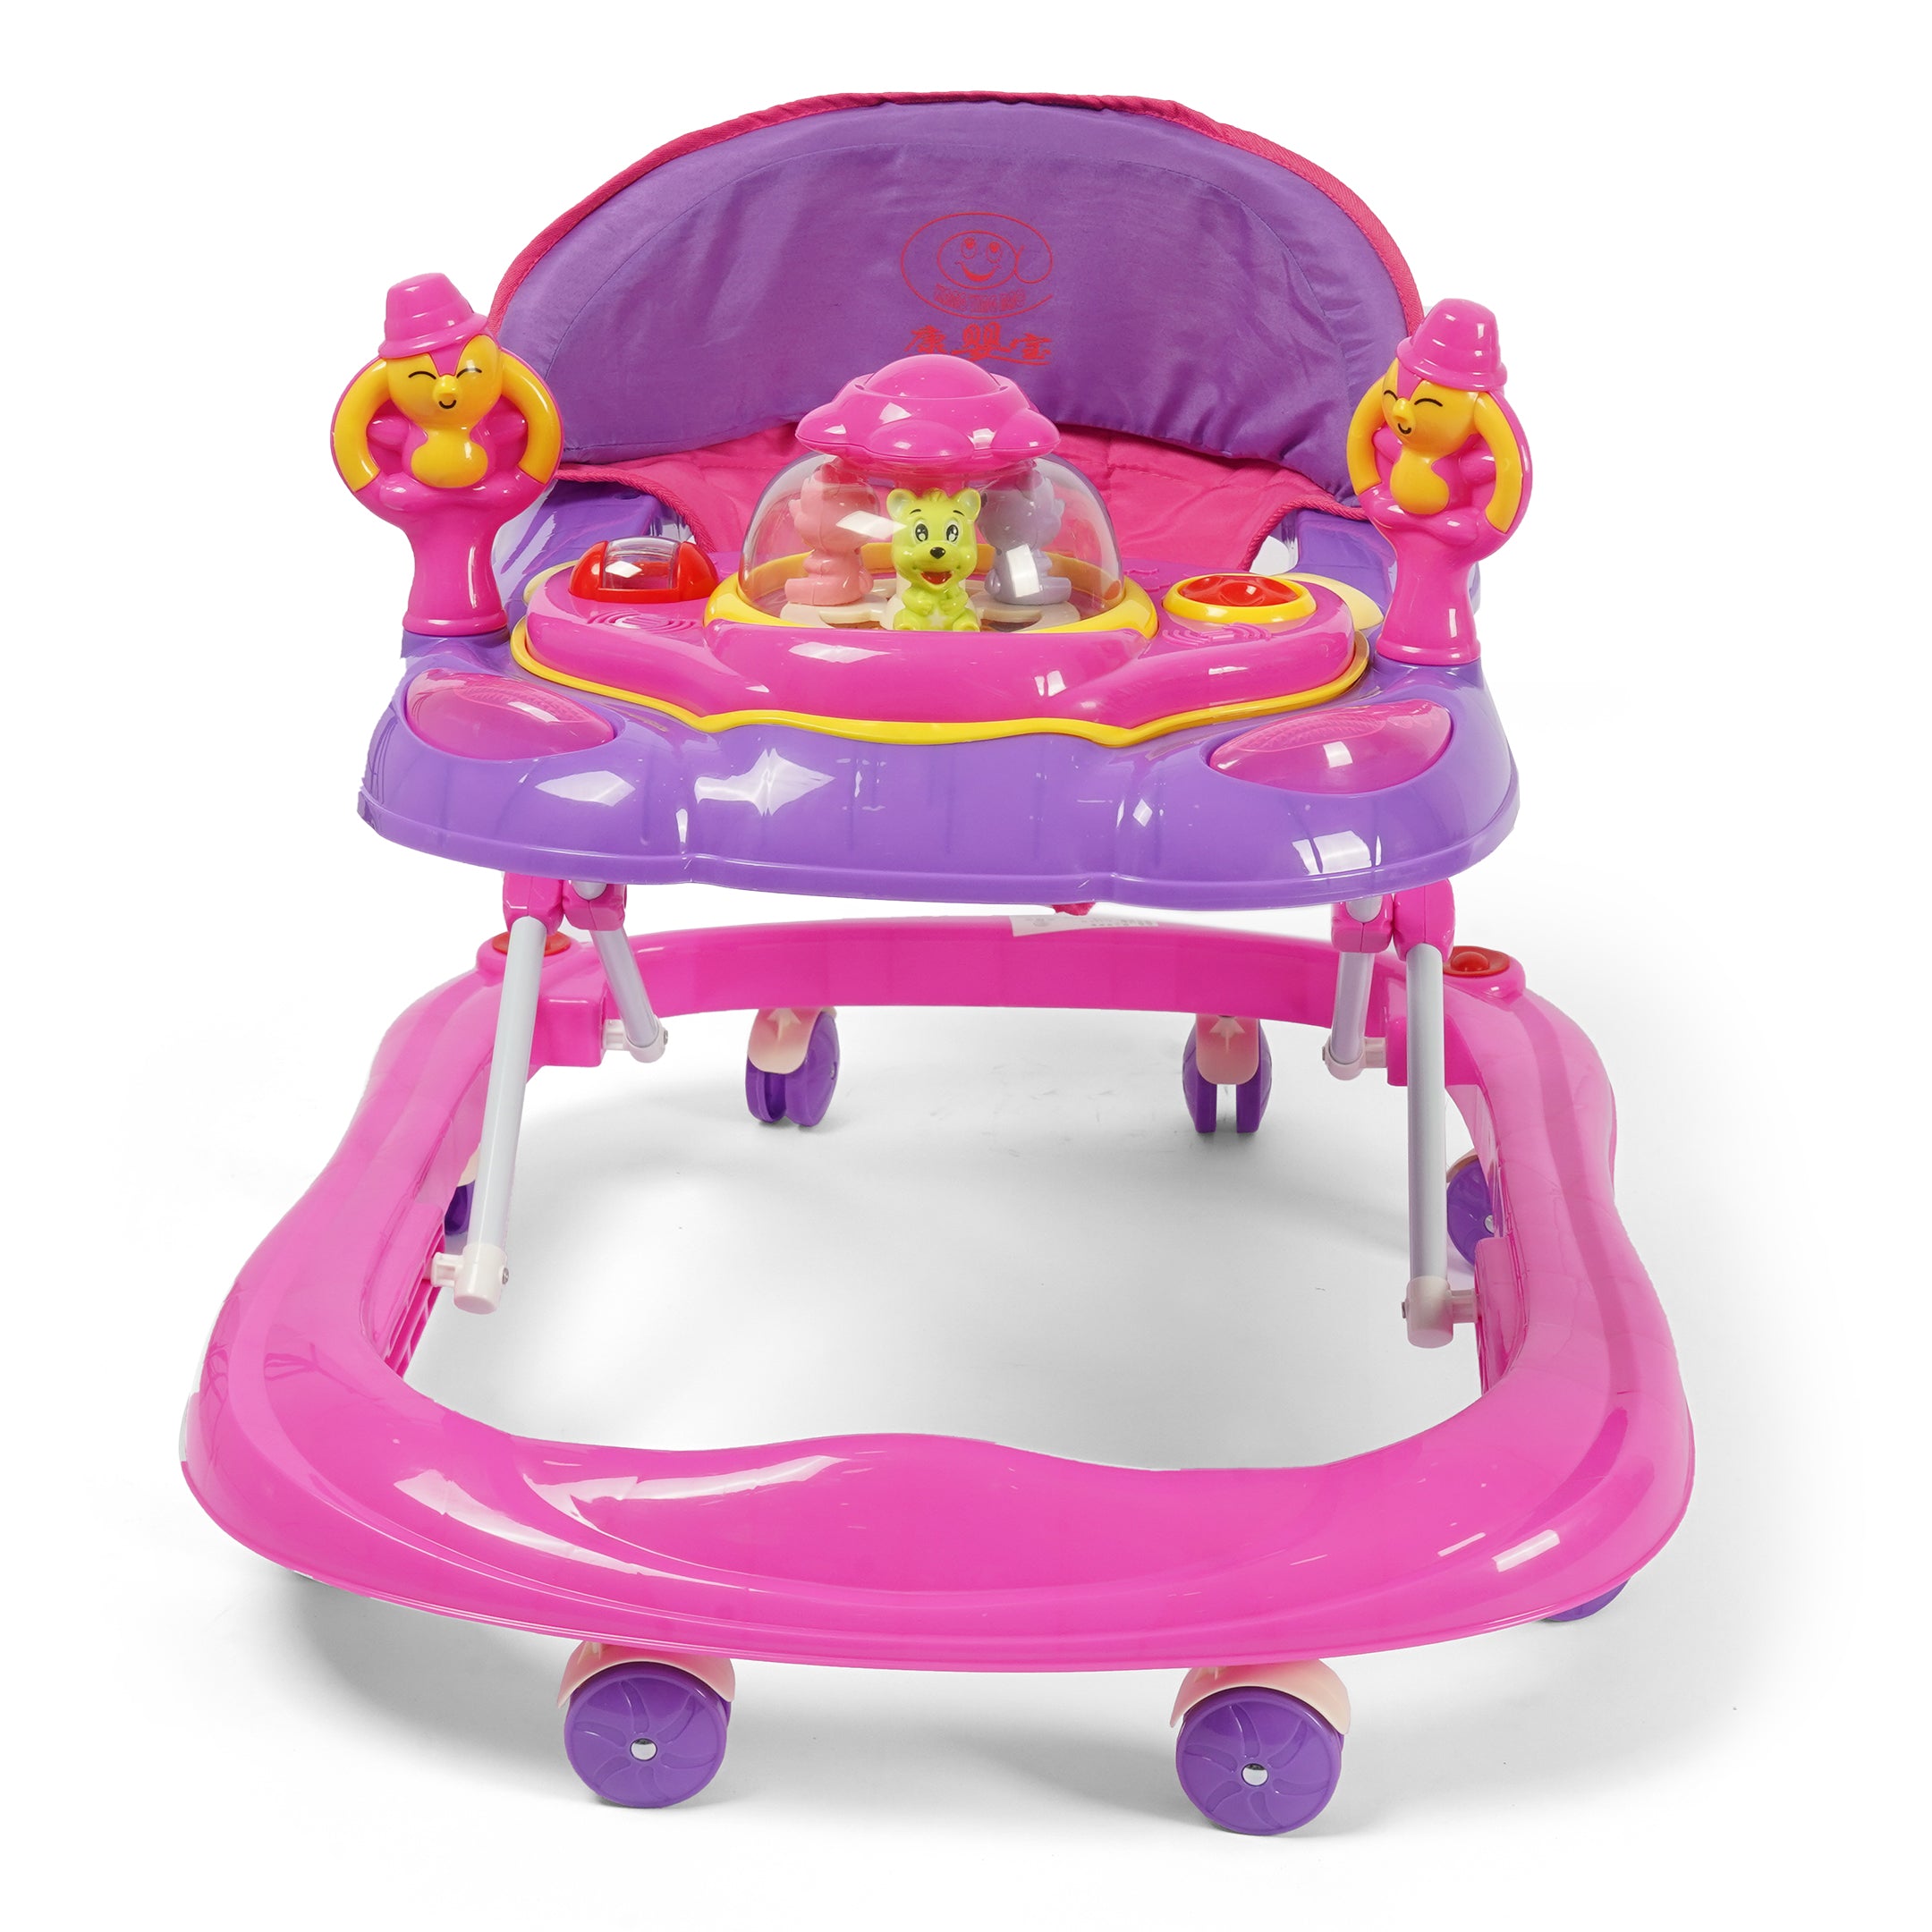 Baby Walker with Front Toys - Pink & Purple